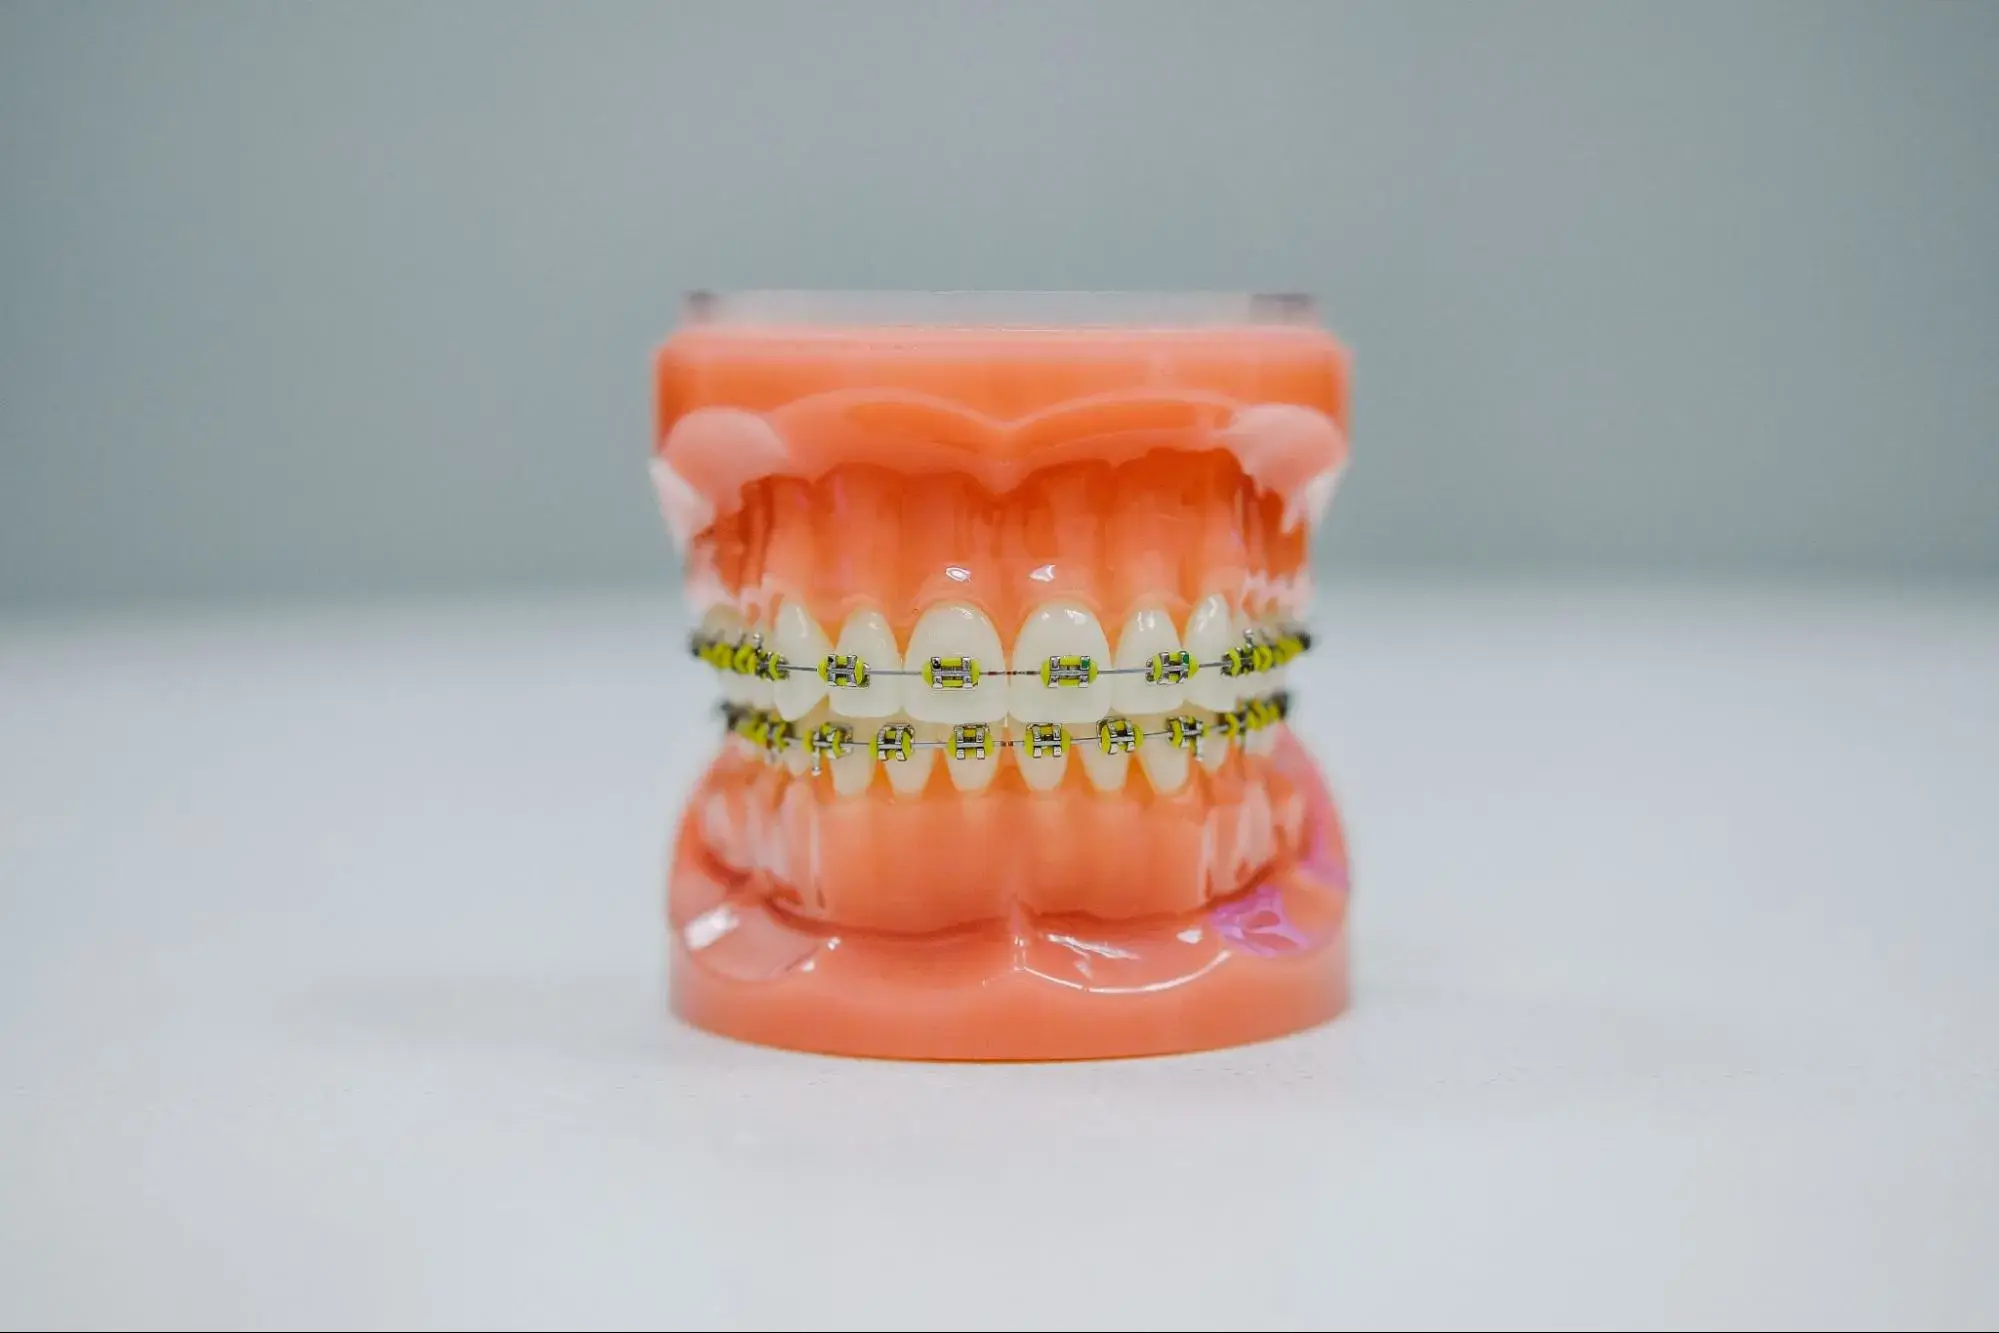 Plastic teeth mold with braces attached.